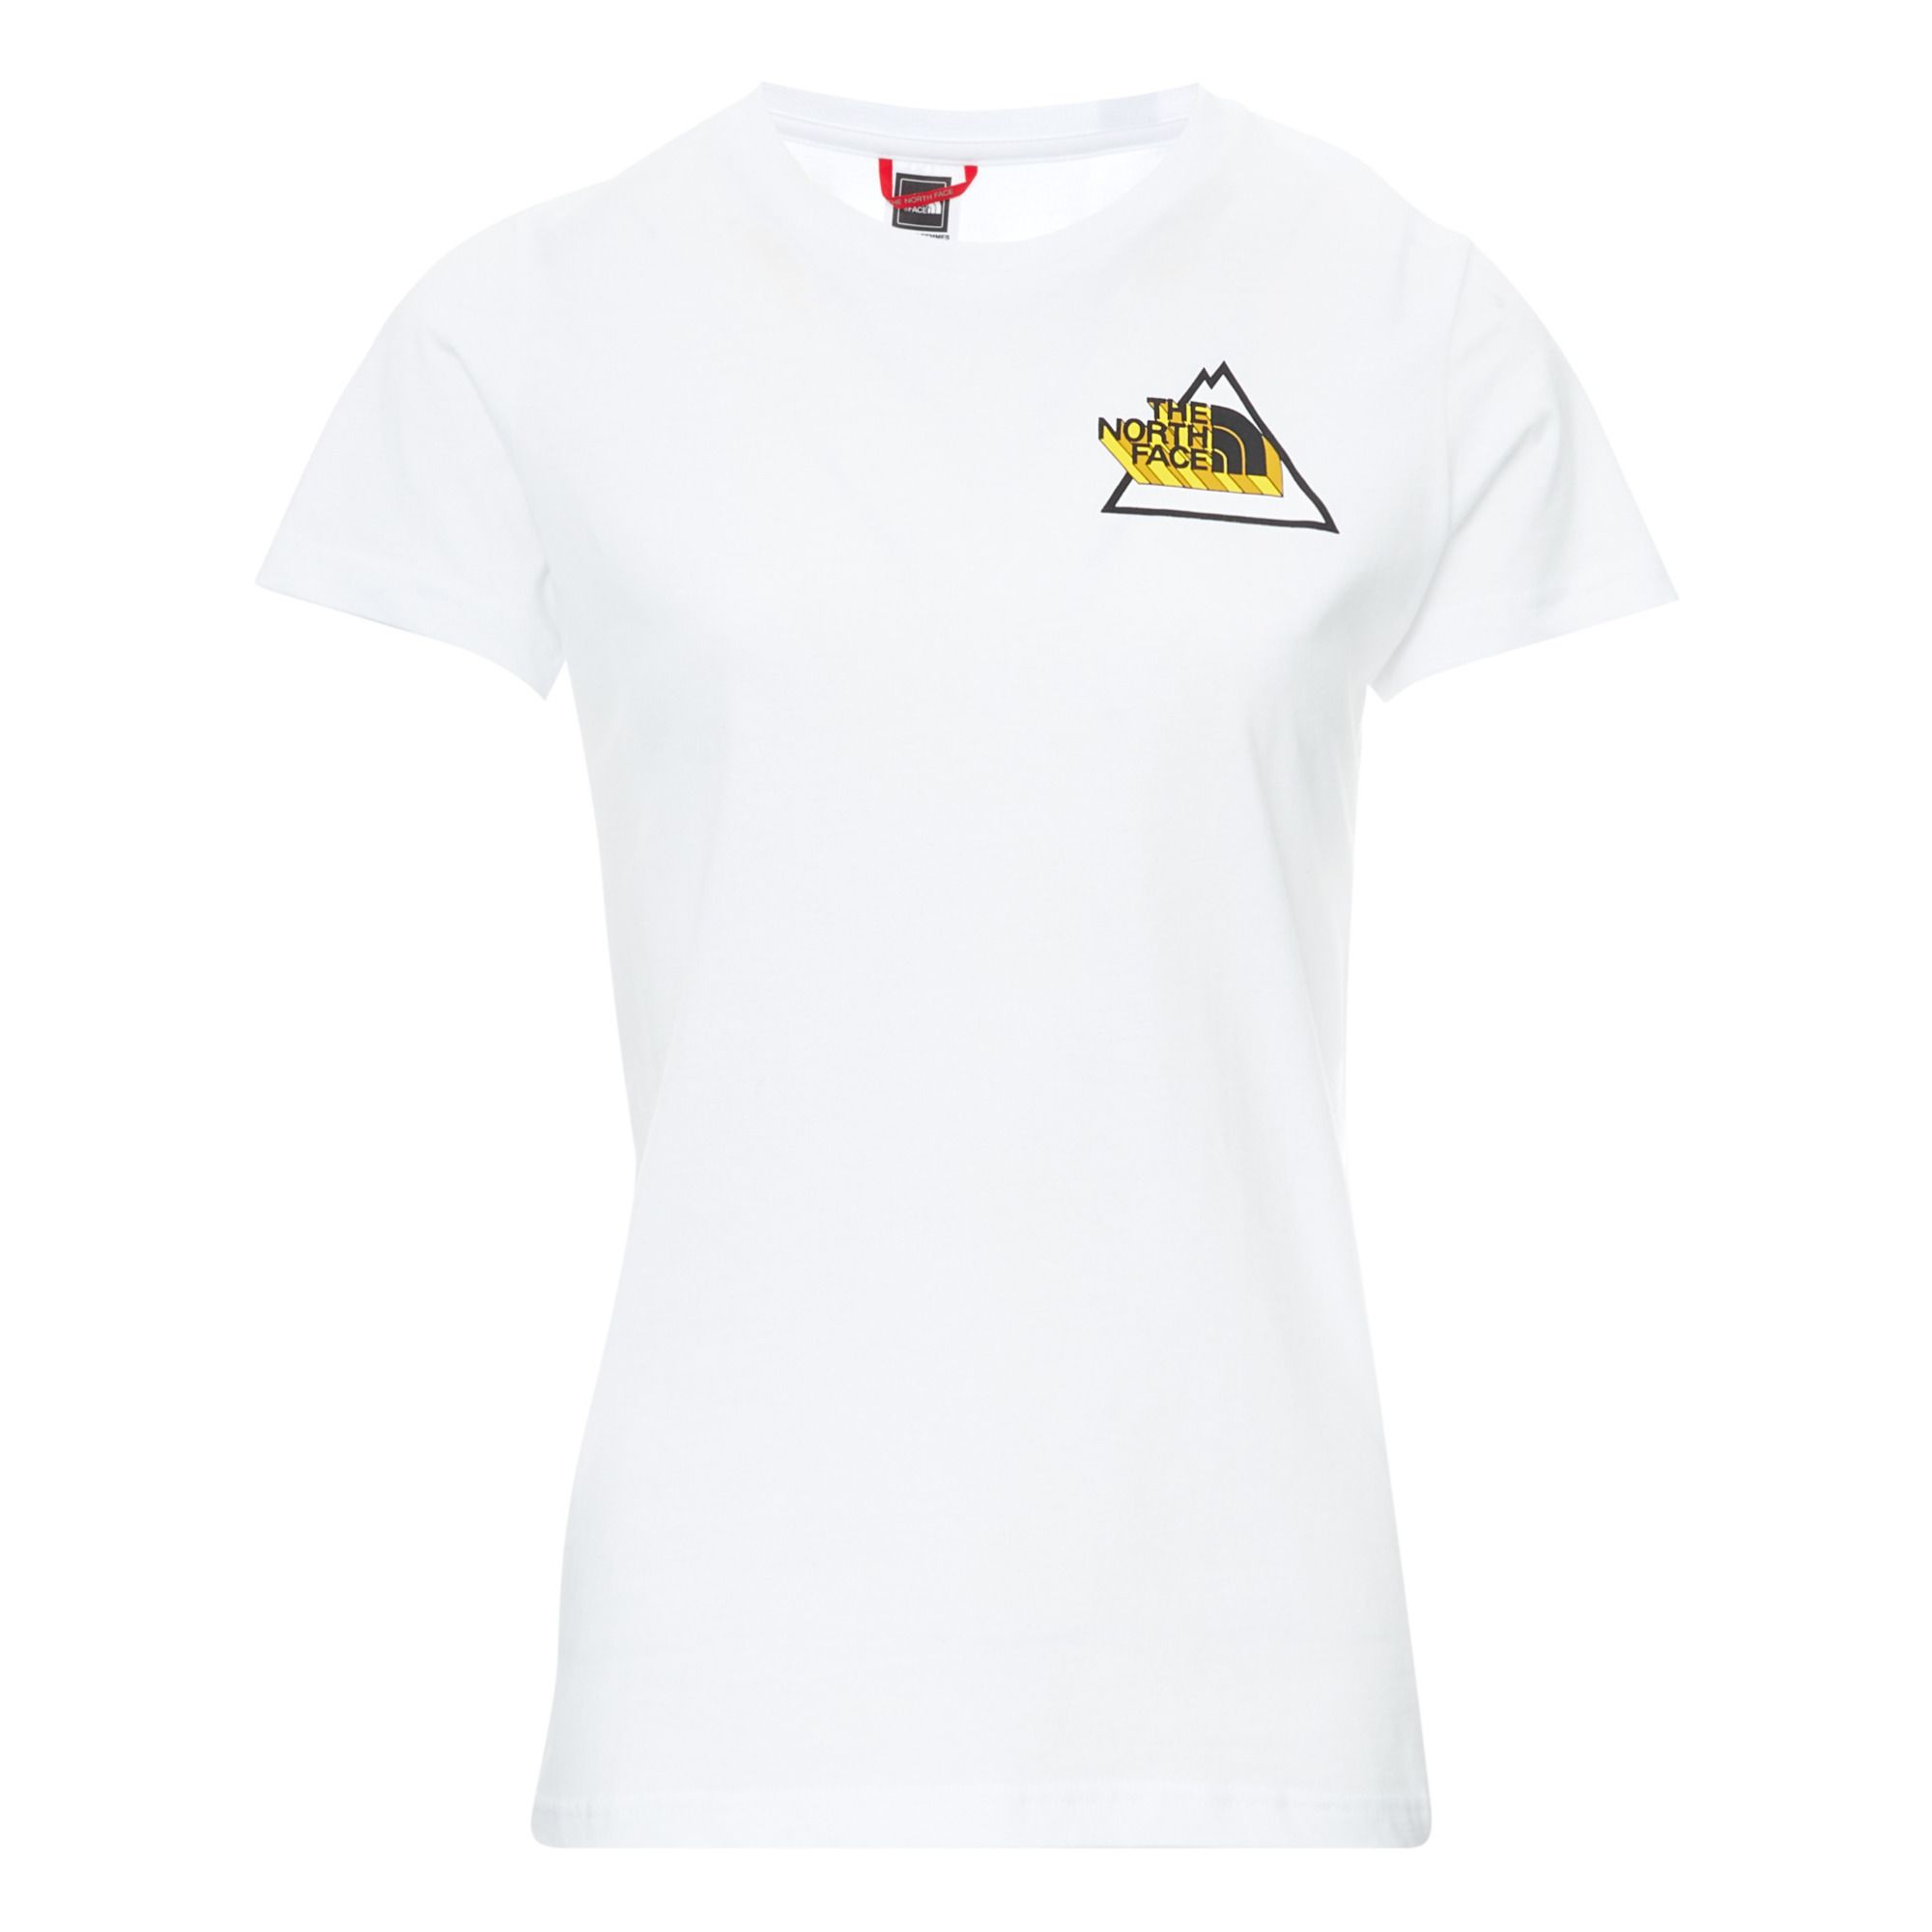 The North Face - T-shirt Threeyama - Collection Femme - - Blanc